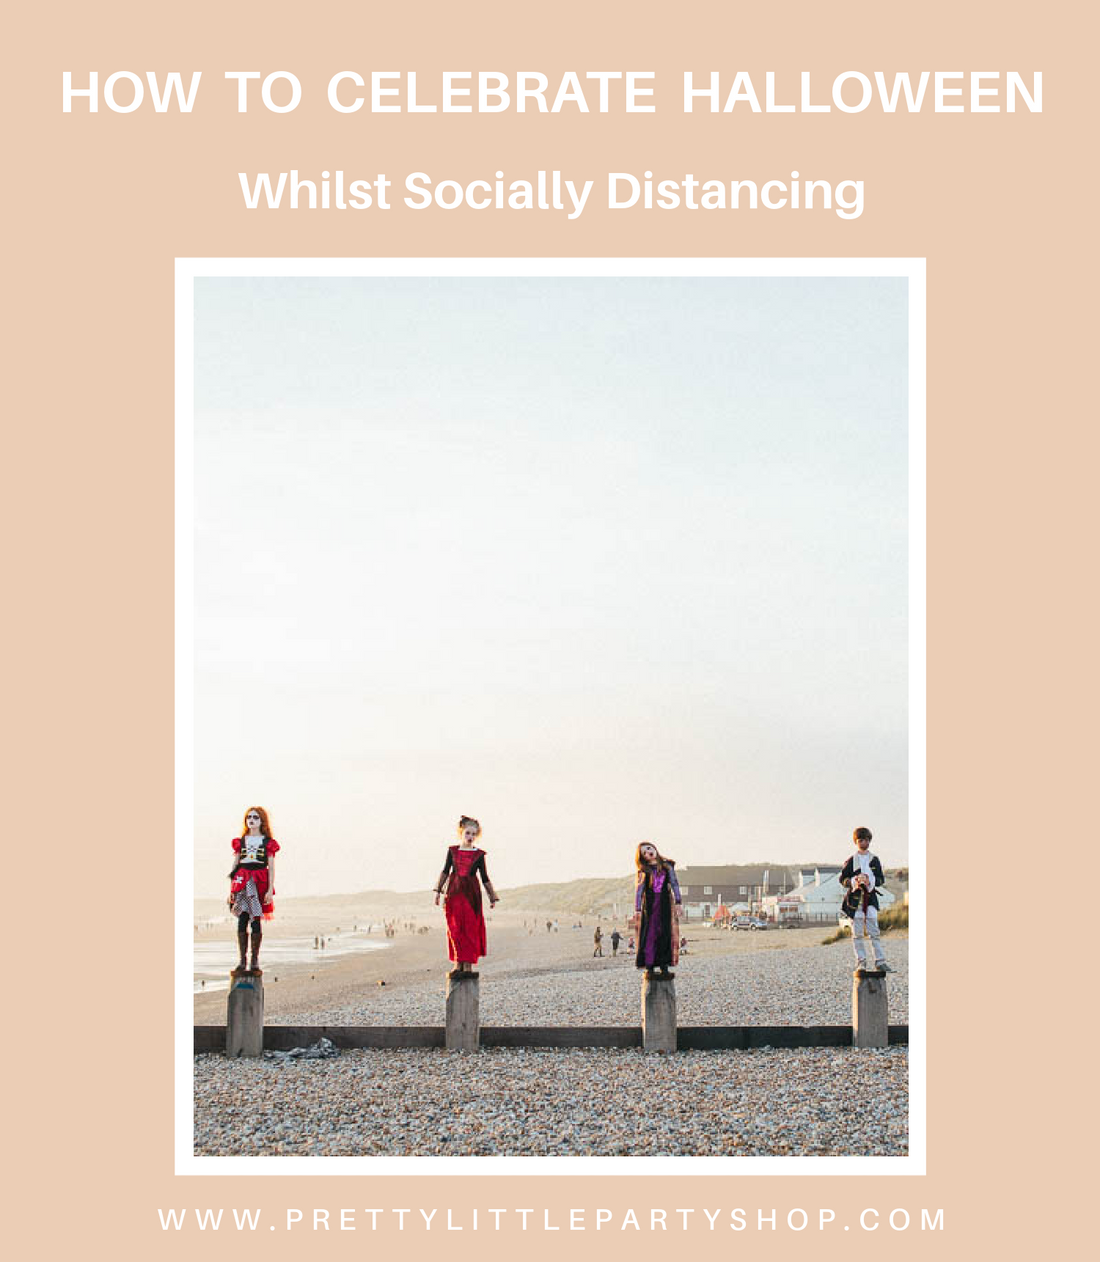 How to Celebrate Halloween During Covid19 and Social restrictions